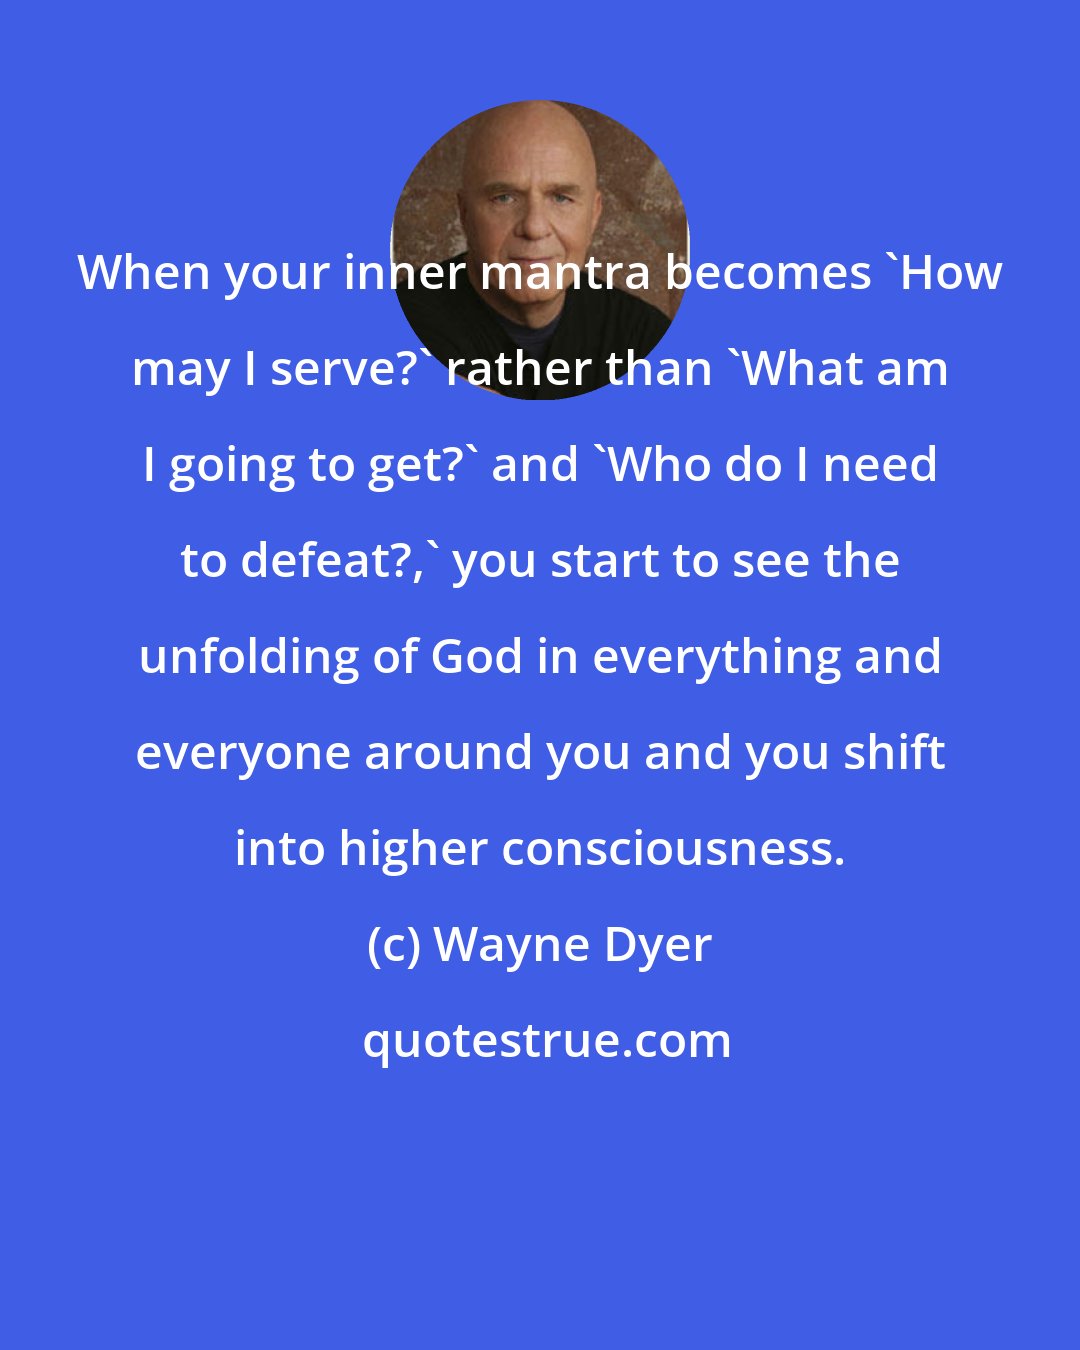 Wayne Dyer: When your inner mantra becomes 'How may I serve?' rather than 'What am I going to get?' and 'Who do I need to defeat?,' you start to see the unfolding of God in everything and everyone around you and you shift into higher consciousness.